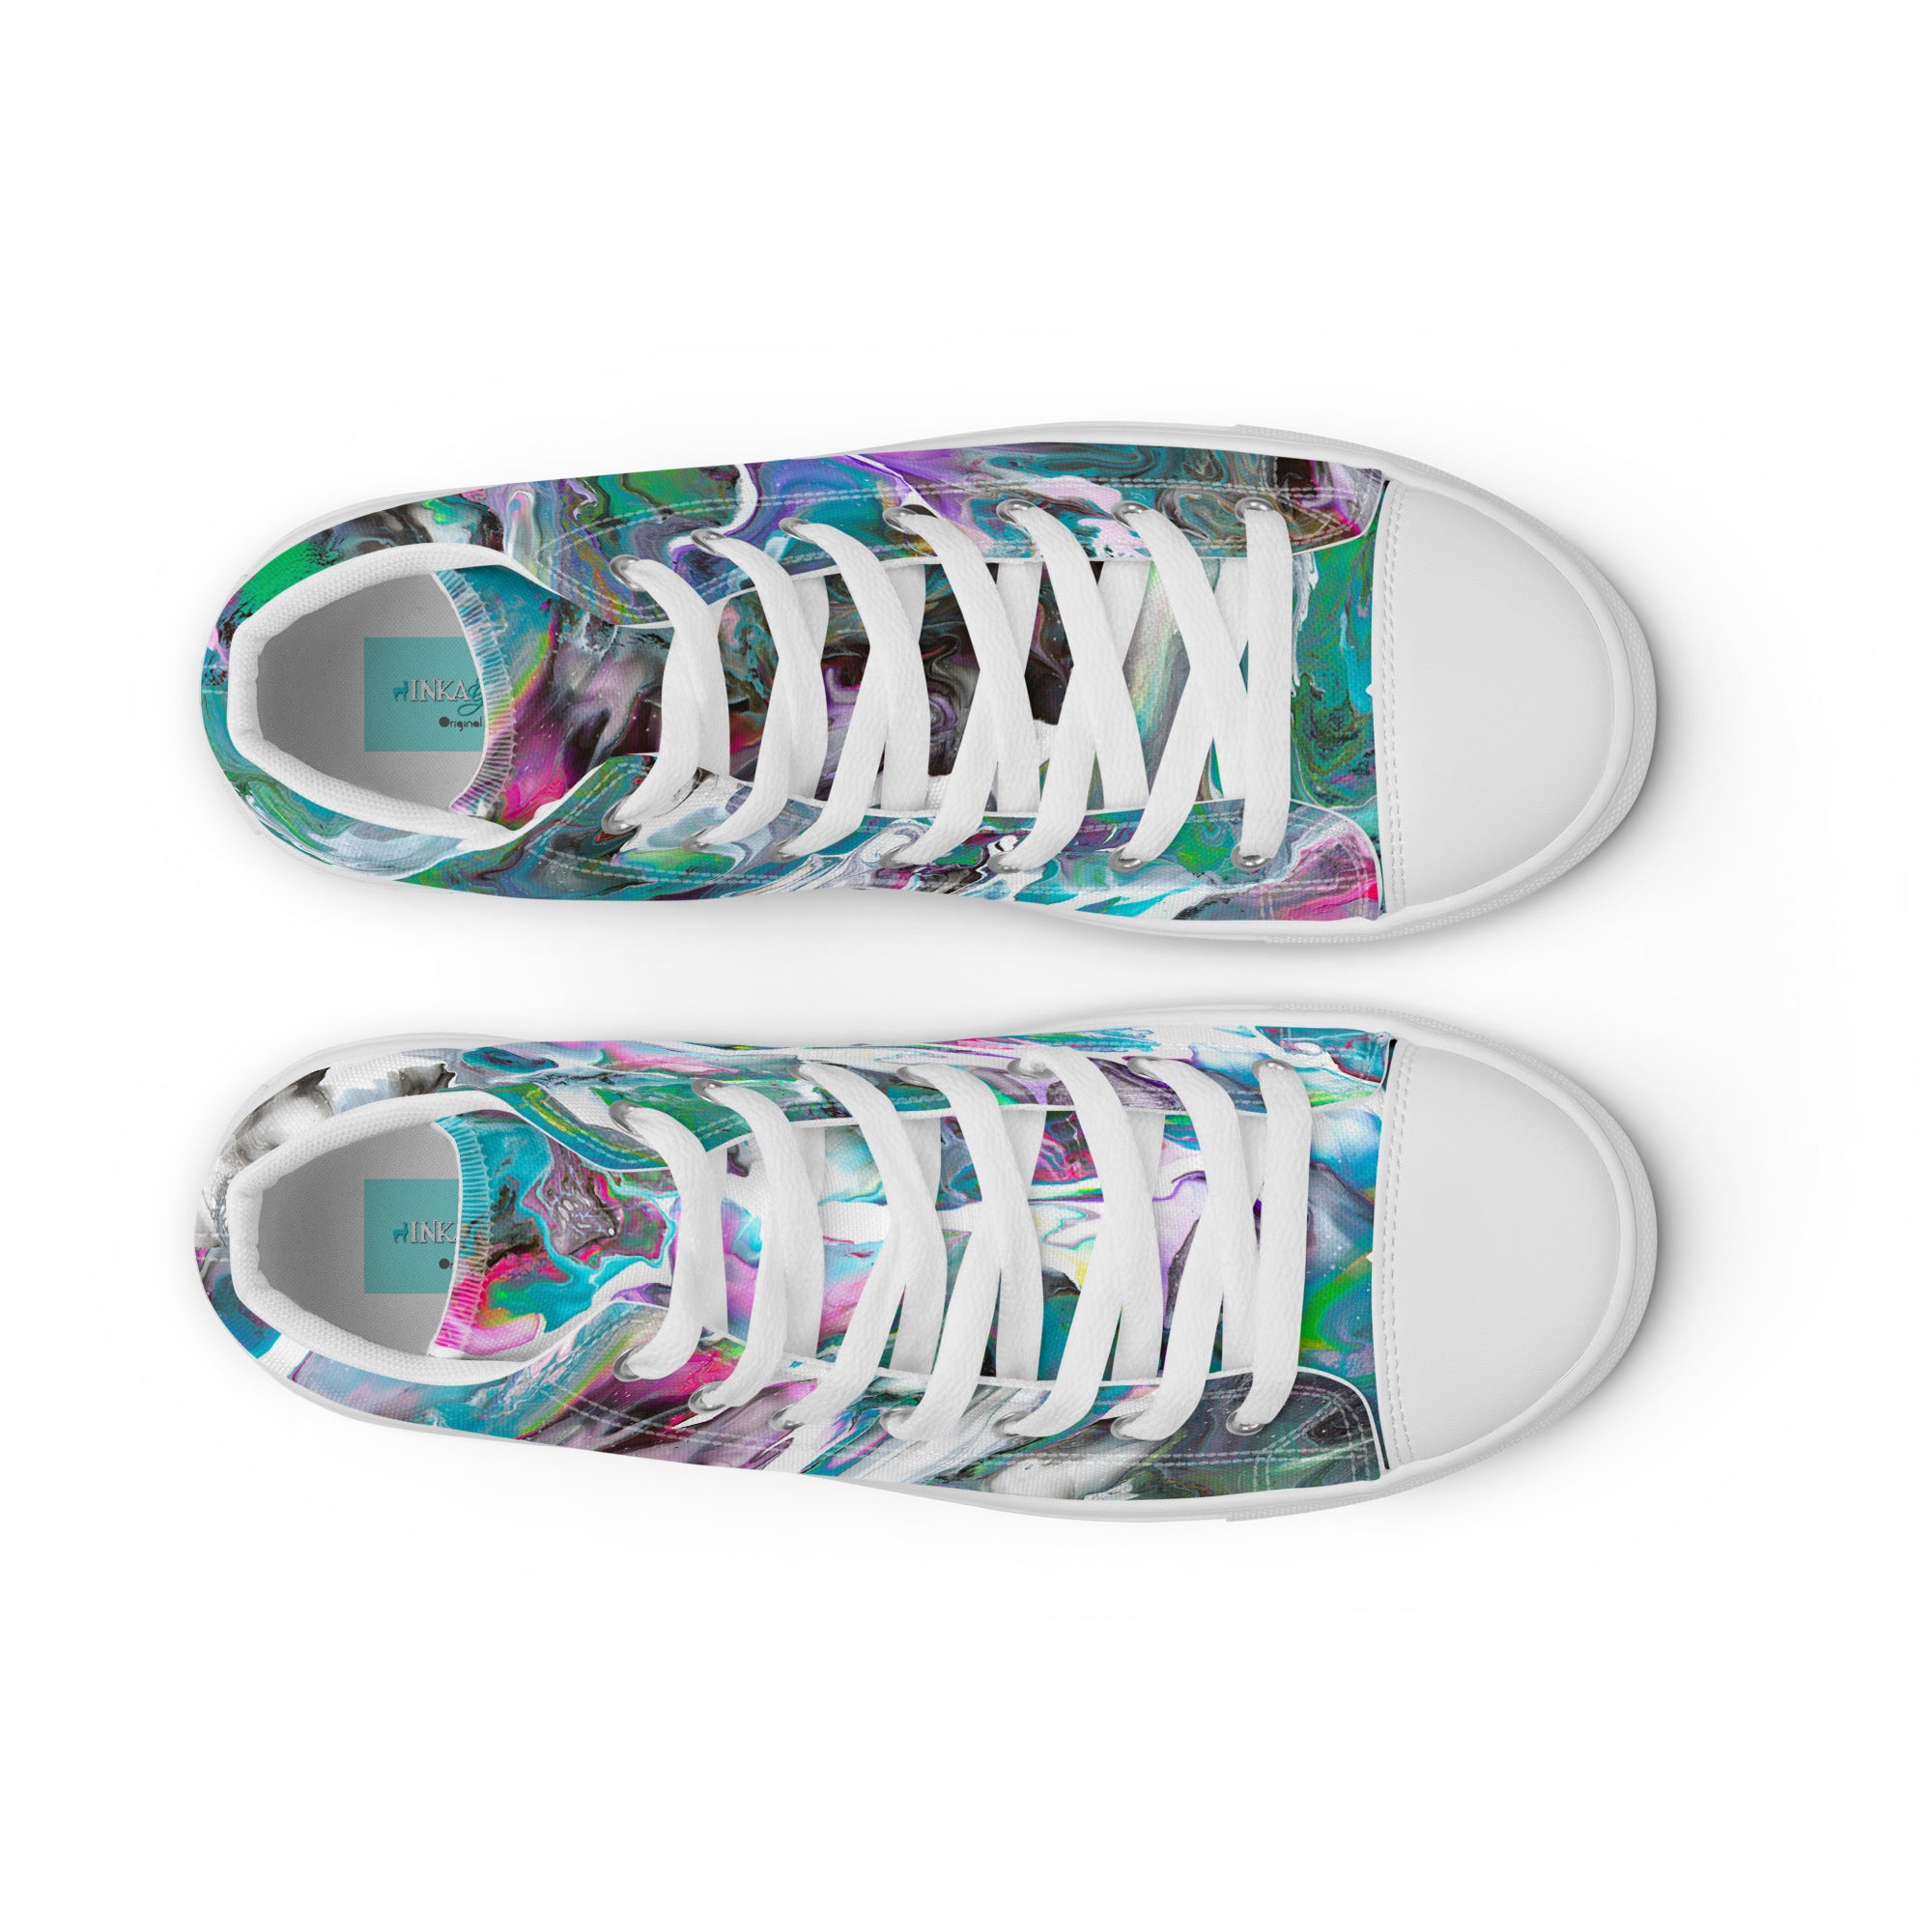 "Northern Lights" Women's High Top Shoes